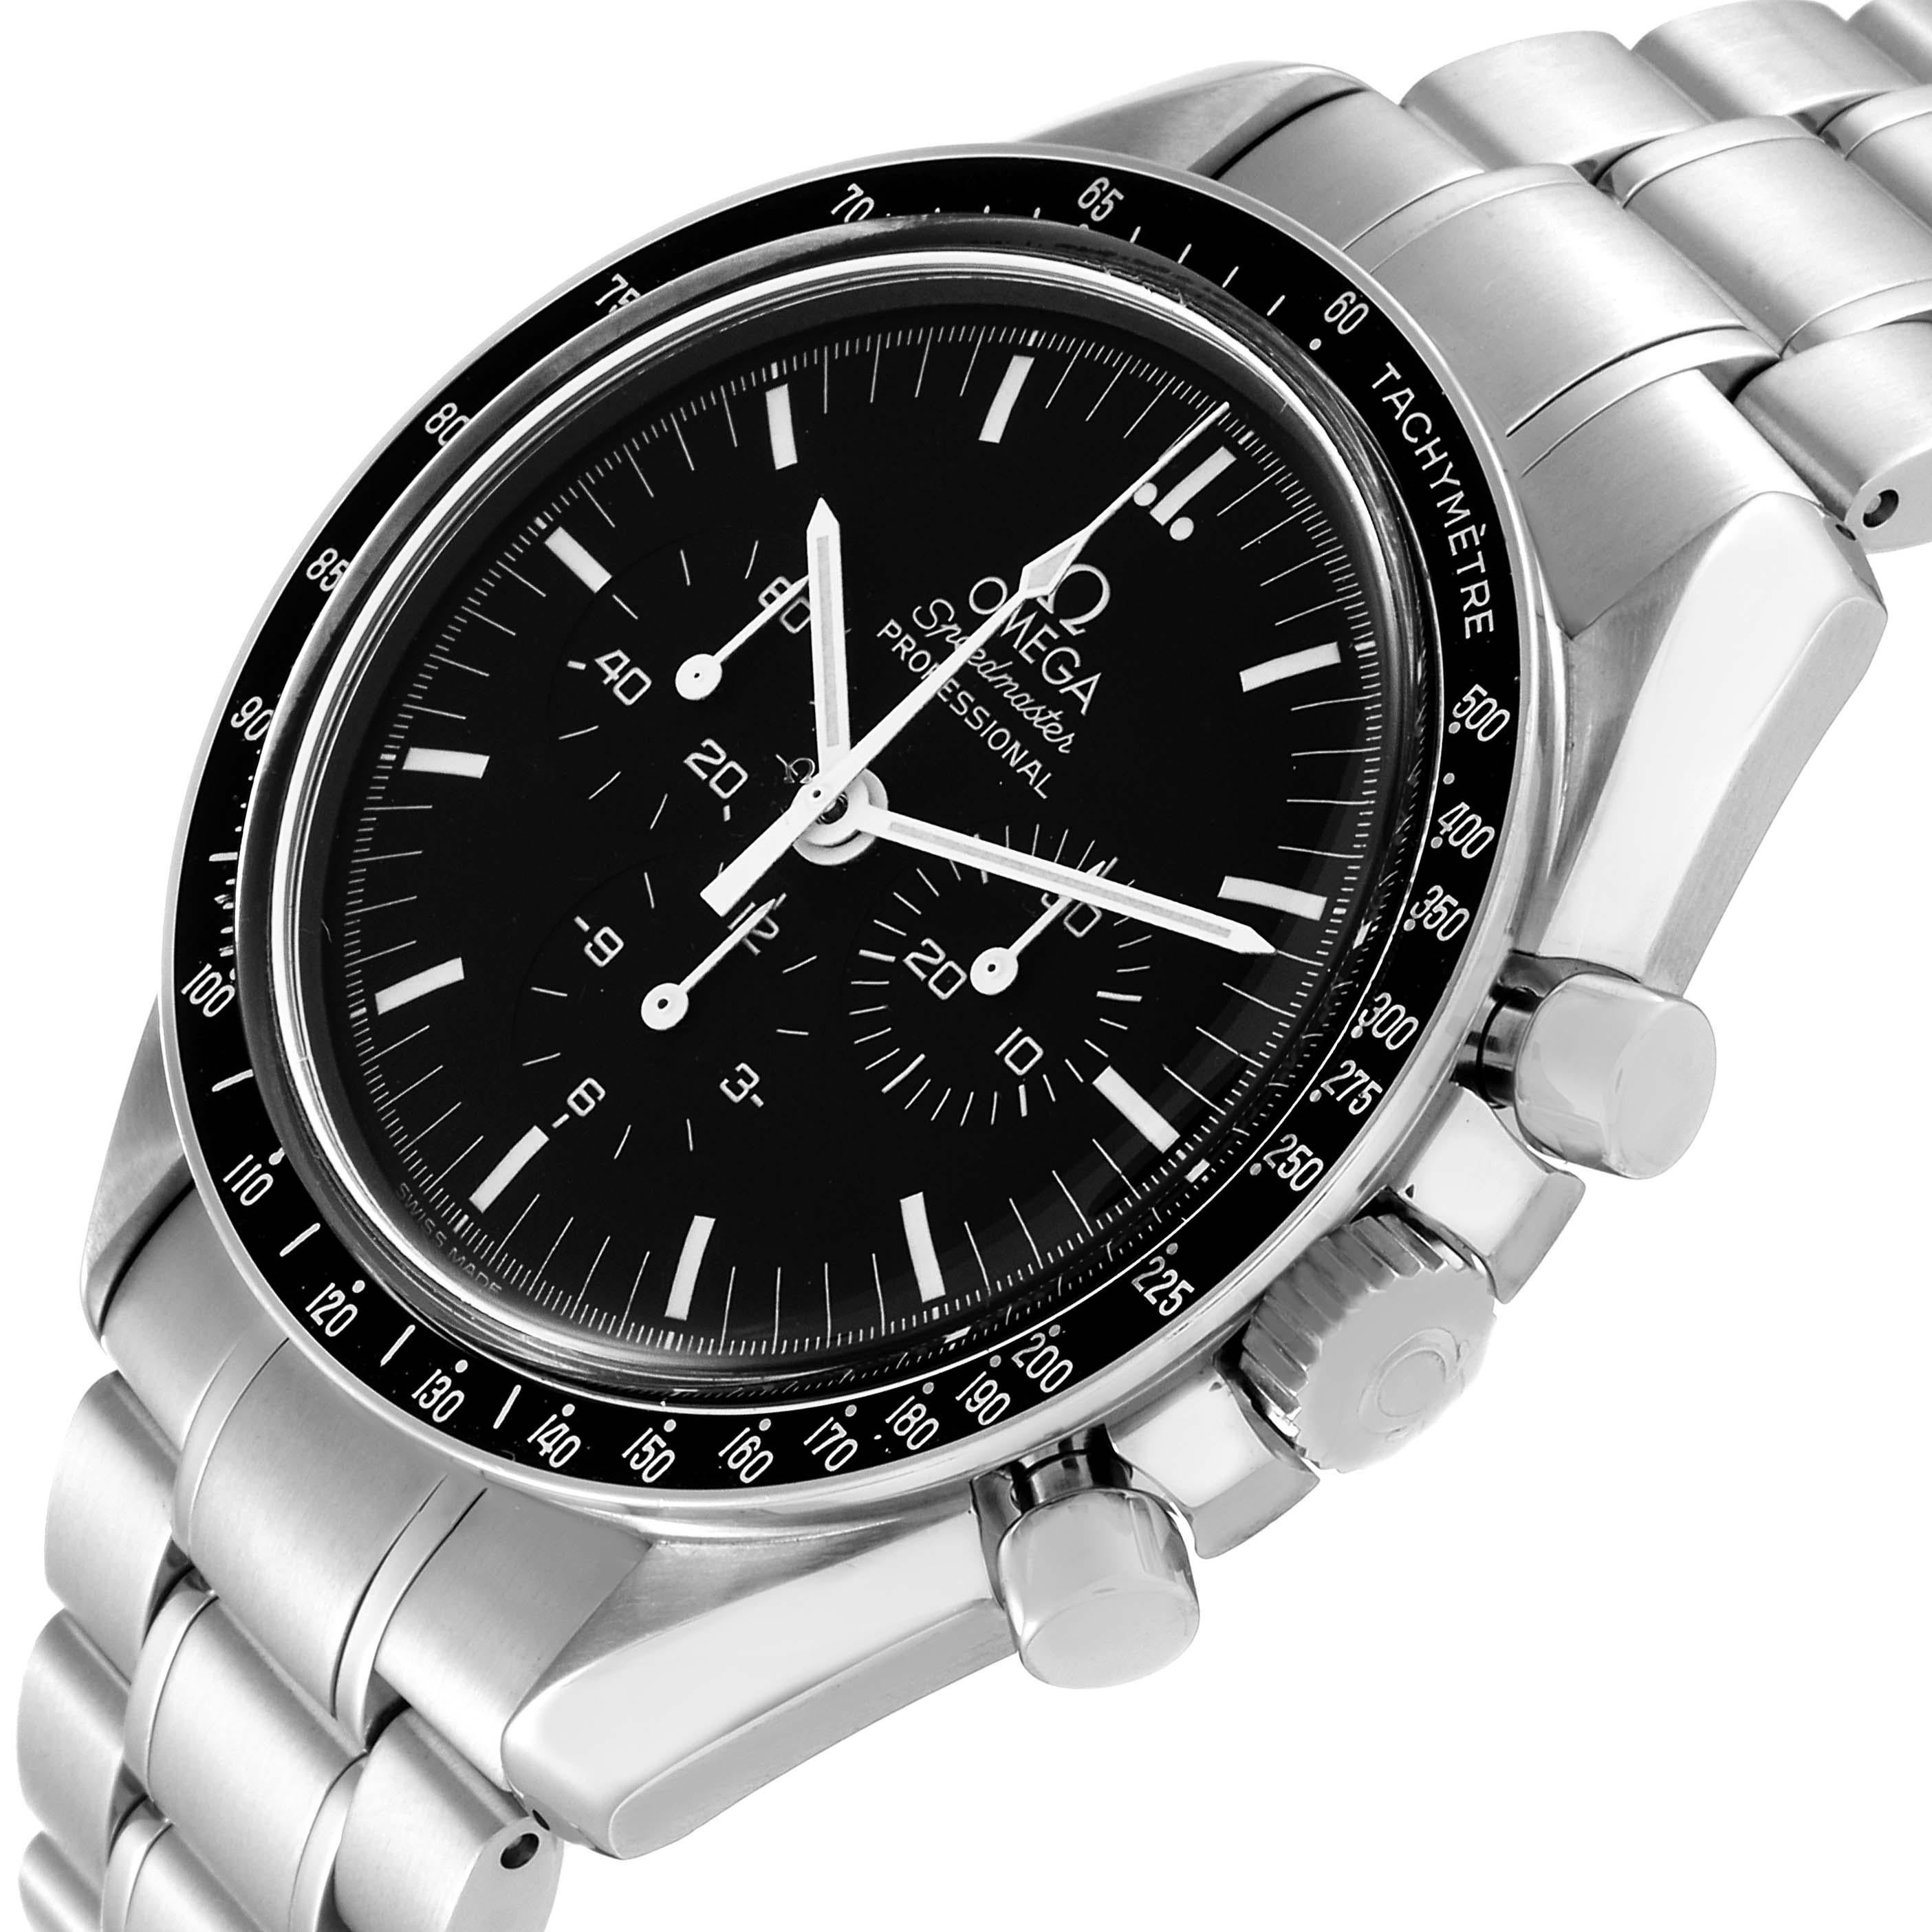 Omega Speedmaster MoonWatch Chronograph Steel Mens Watch 3570.50.00 Box Card In Excellent Condition For Sale In Atlanta, GA